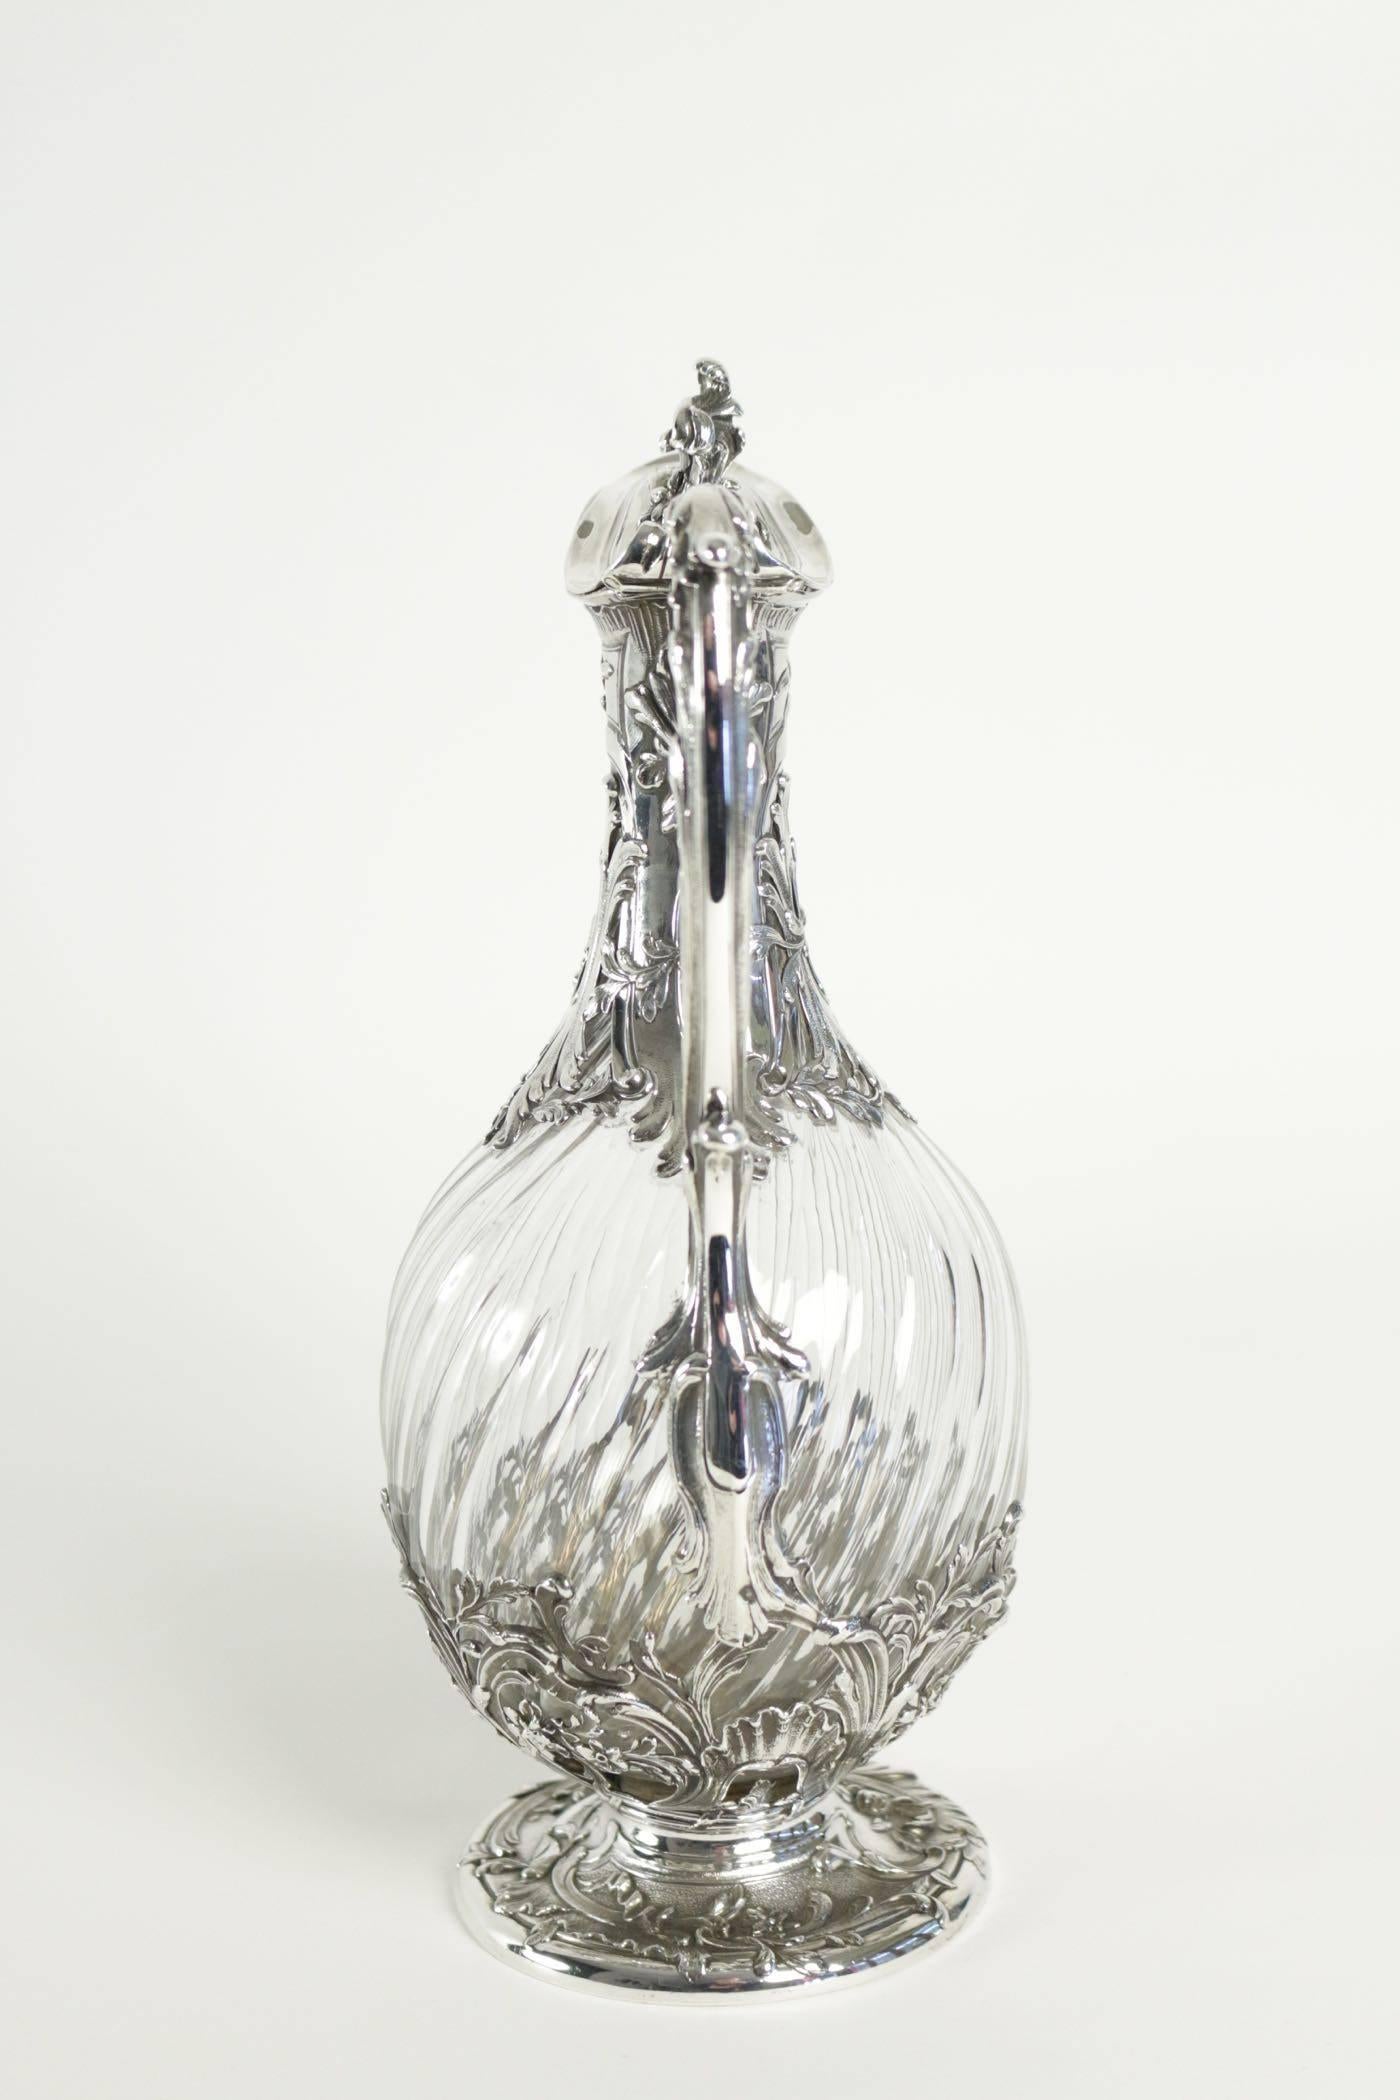 French sterling silver and cut-glass one claret jug.

 Rococo styling spiral cut body. Measure: weight 930 gr

Napoléon III silver and crystal wine decanter or Claret Jugantique French hallmarked sterling silver and cut glassornate with Rococo